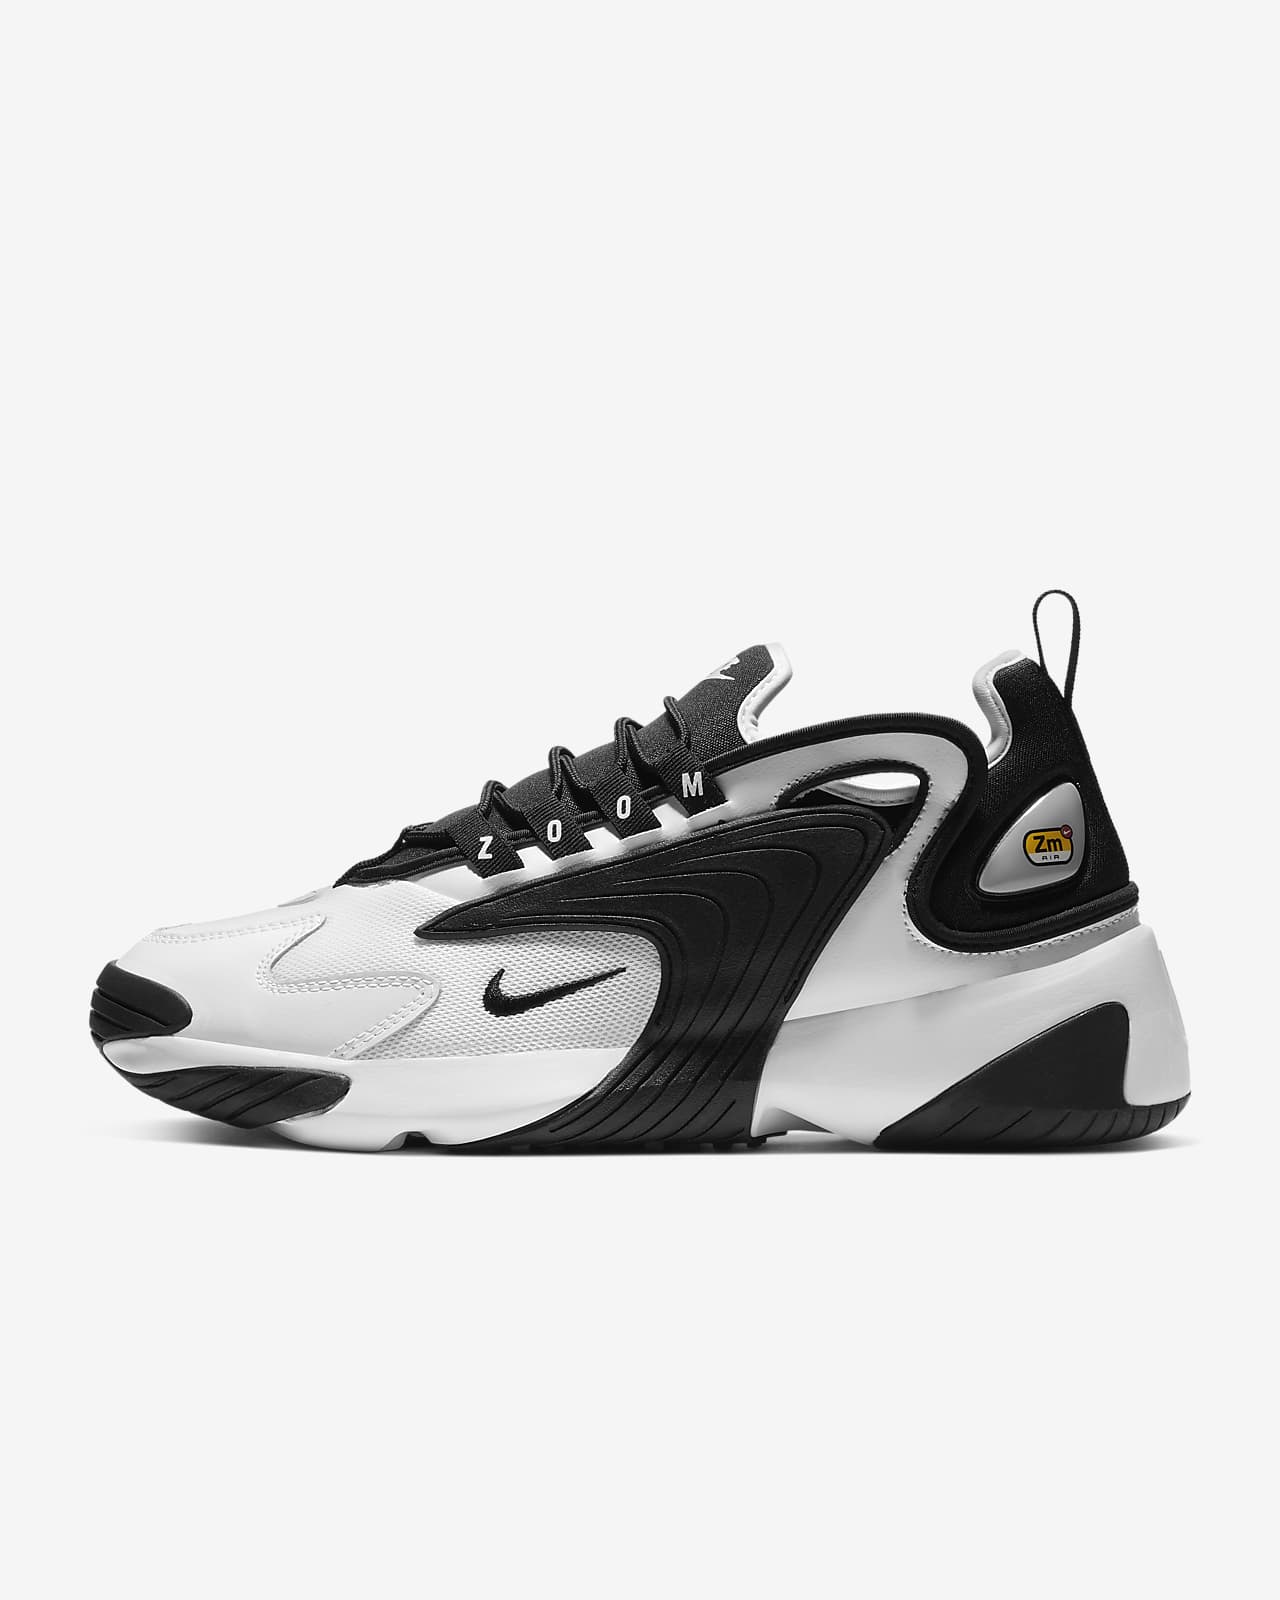 Hummingbird Very angry elbow Black Nike Zoom 2k Hot Sale, SAVE 41% - aveclumiere.com